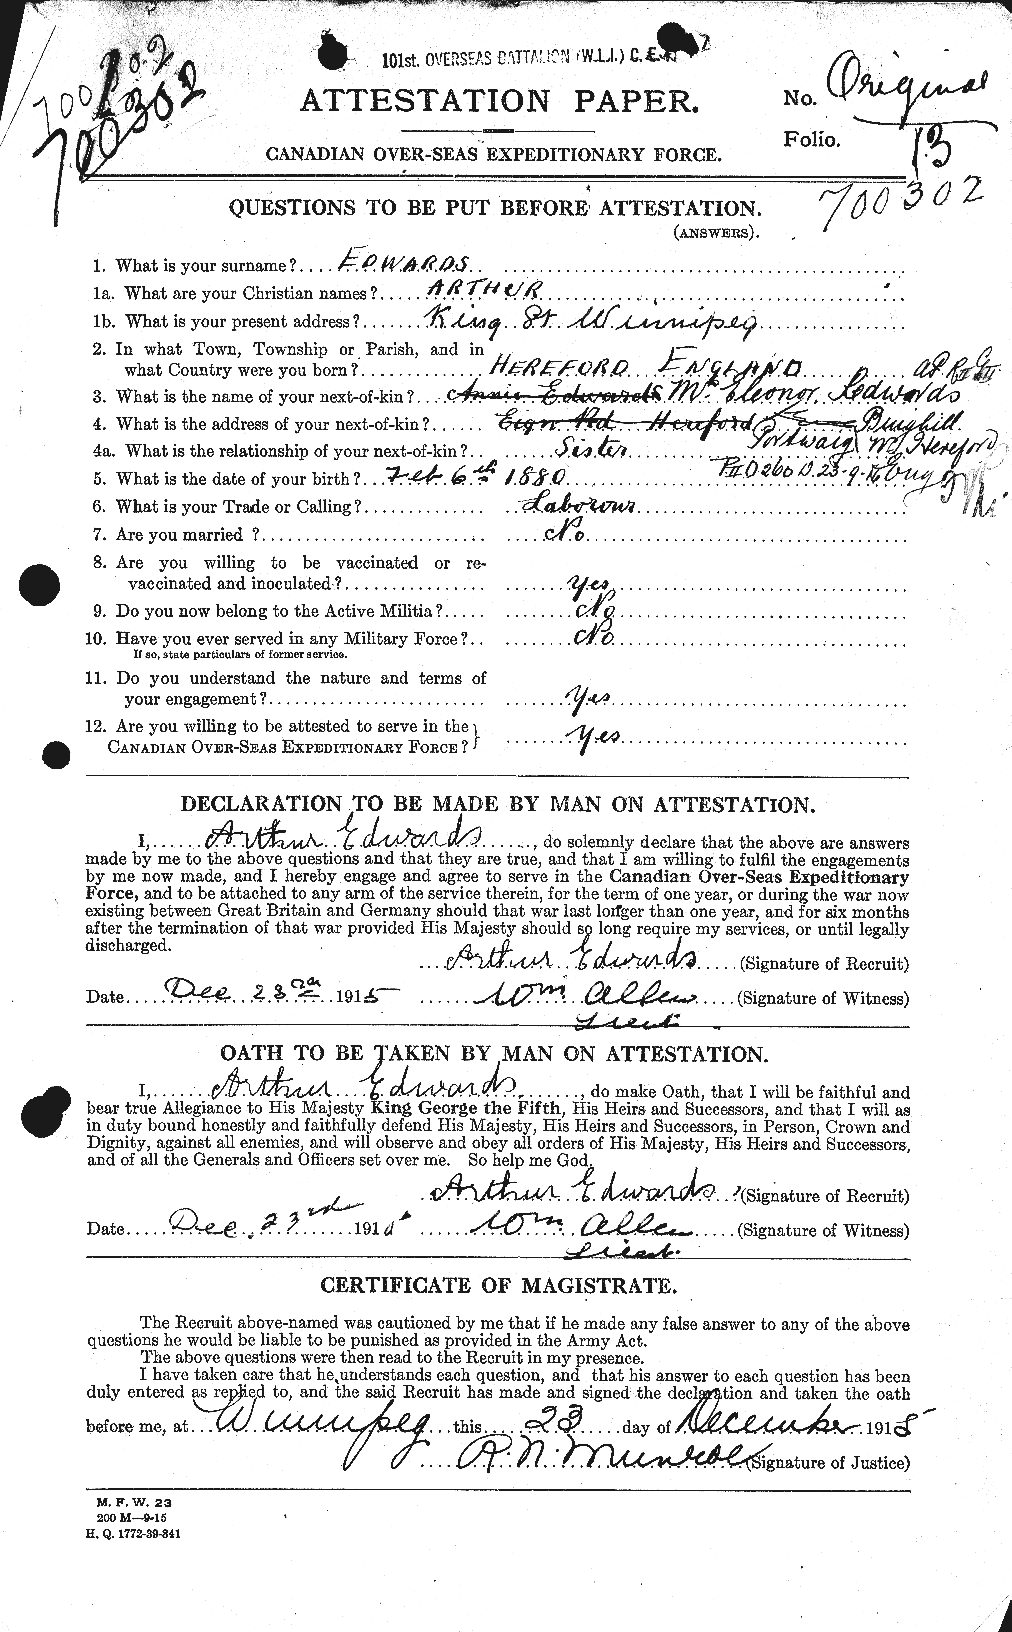 Personnel Records of the First World War - CEF 313131a